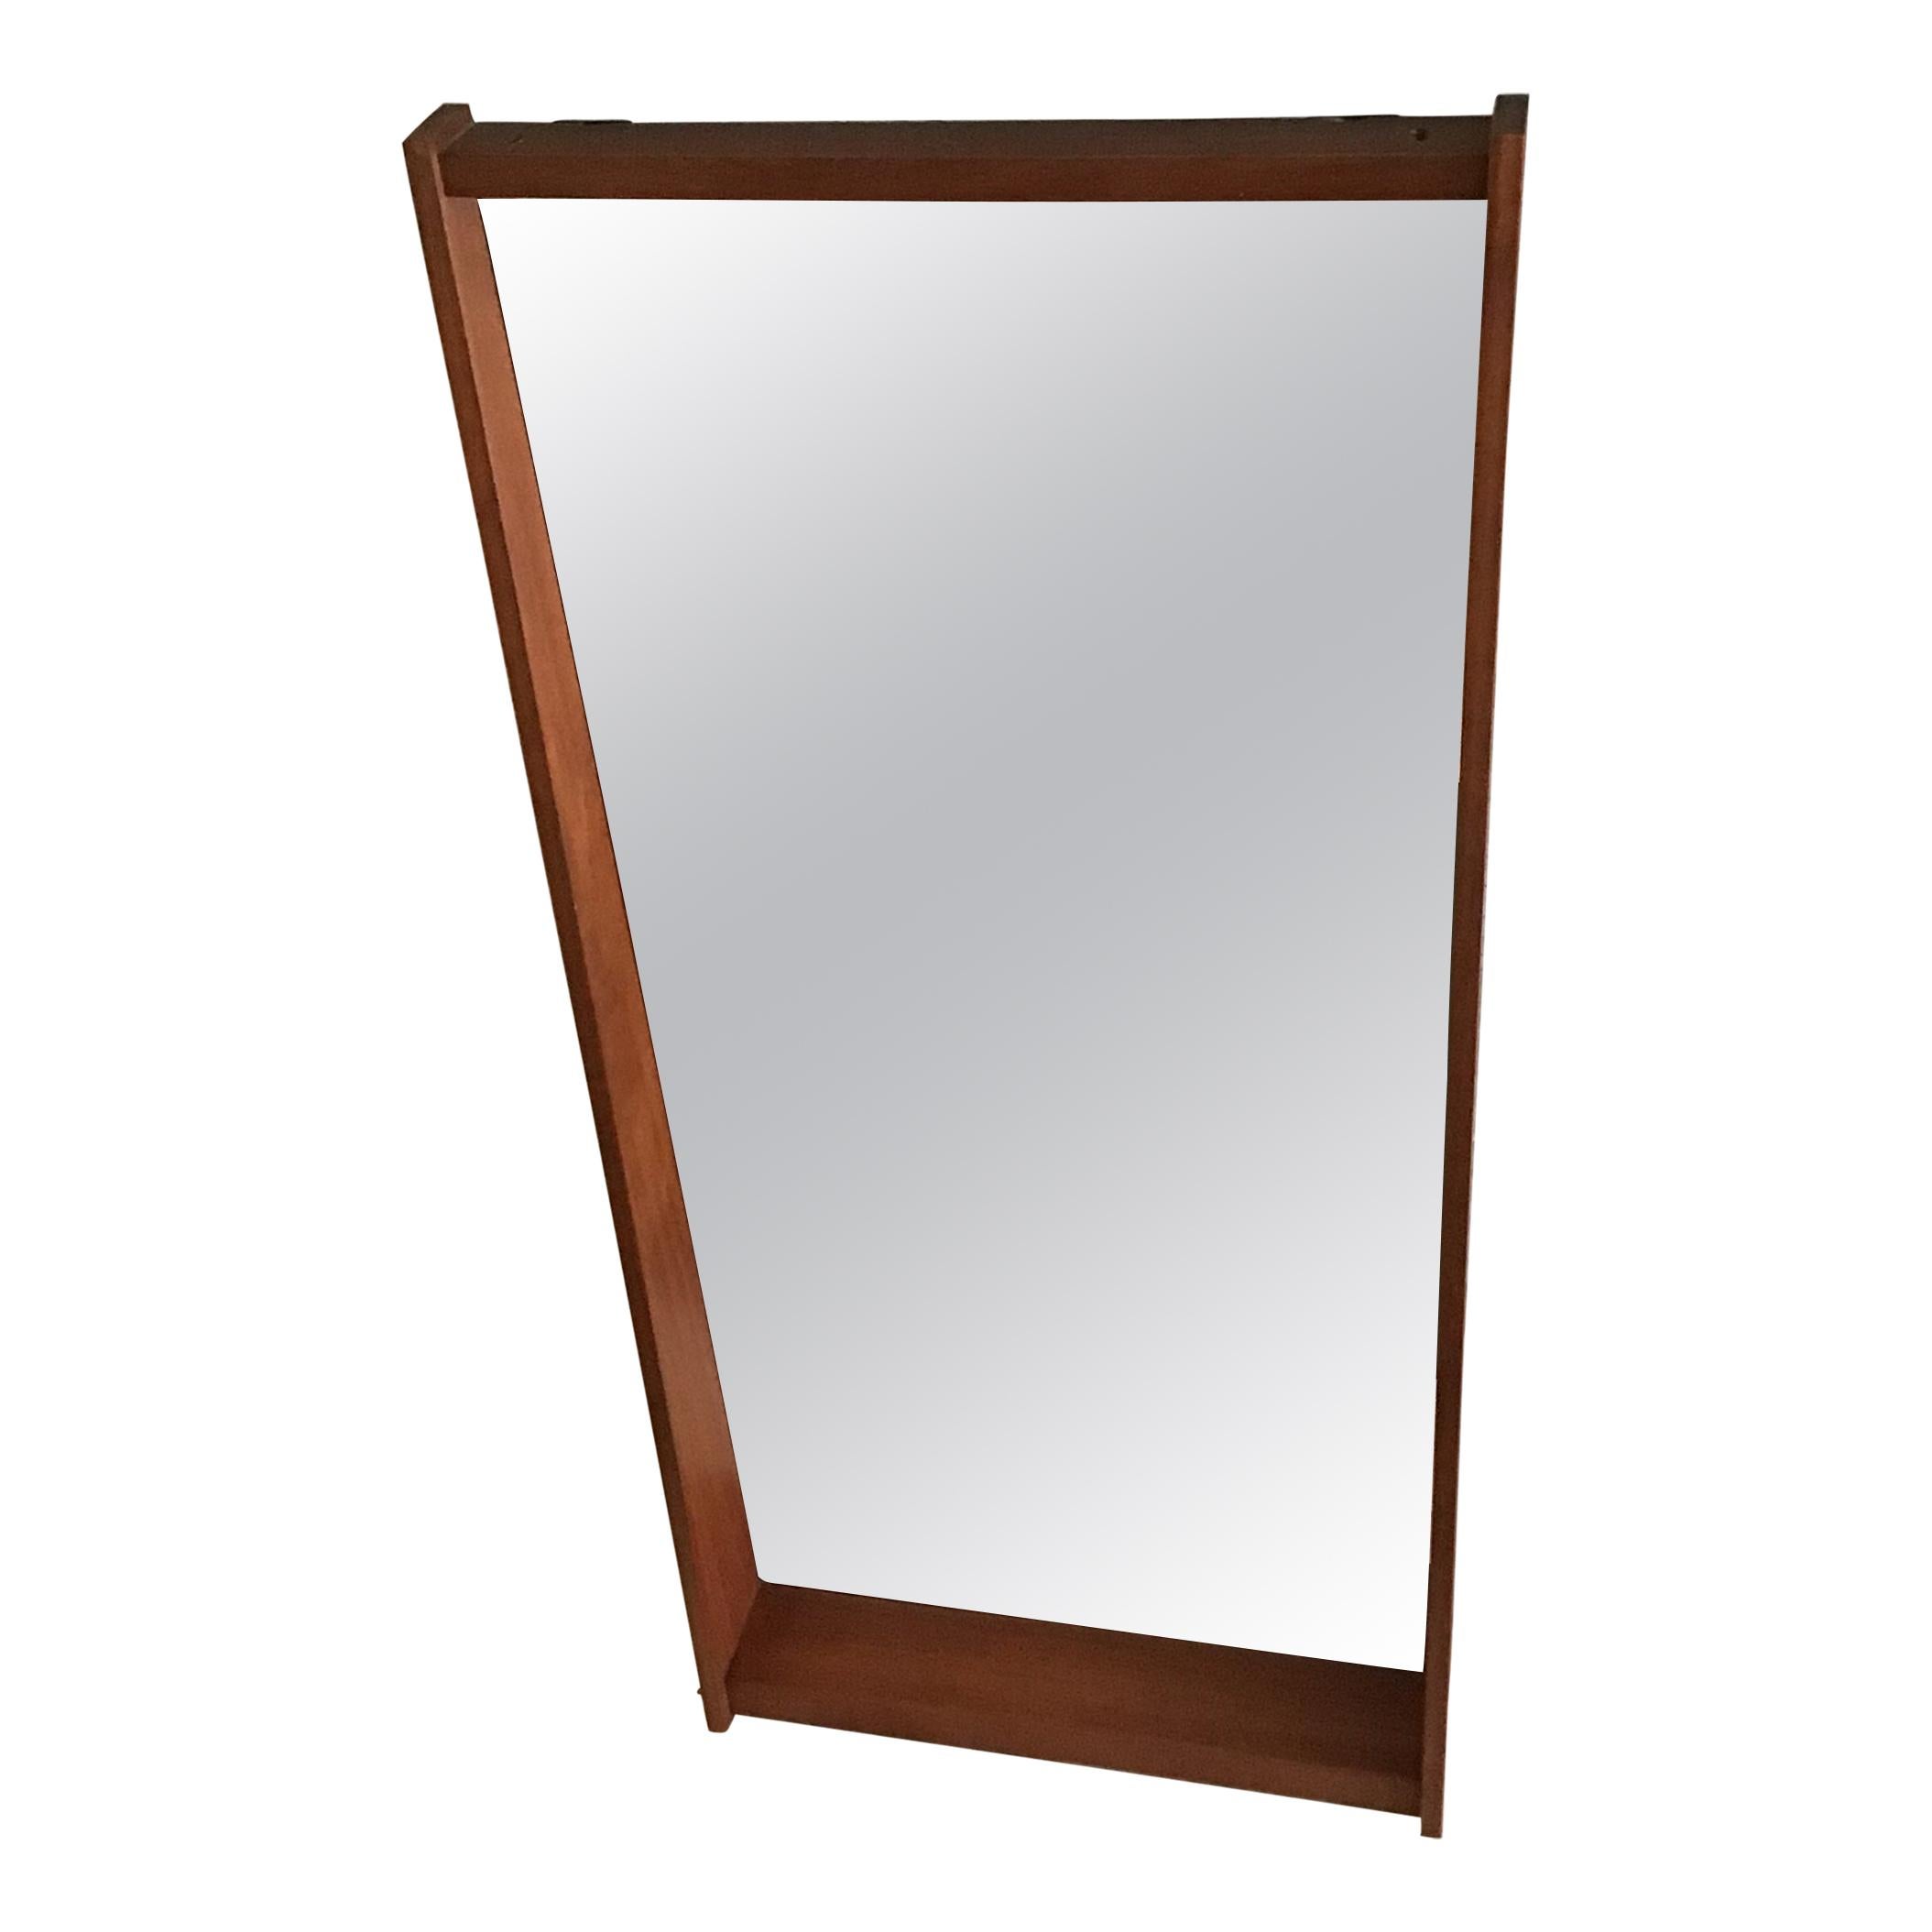 Ico Parisi “In the Stile” Mirror Wood Brass 1960 Italy For Sale